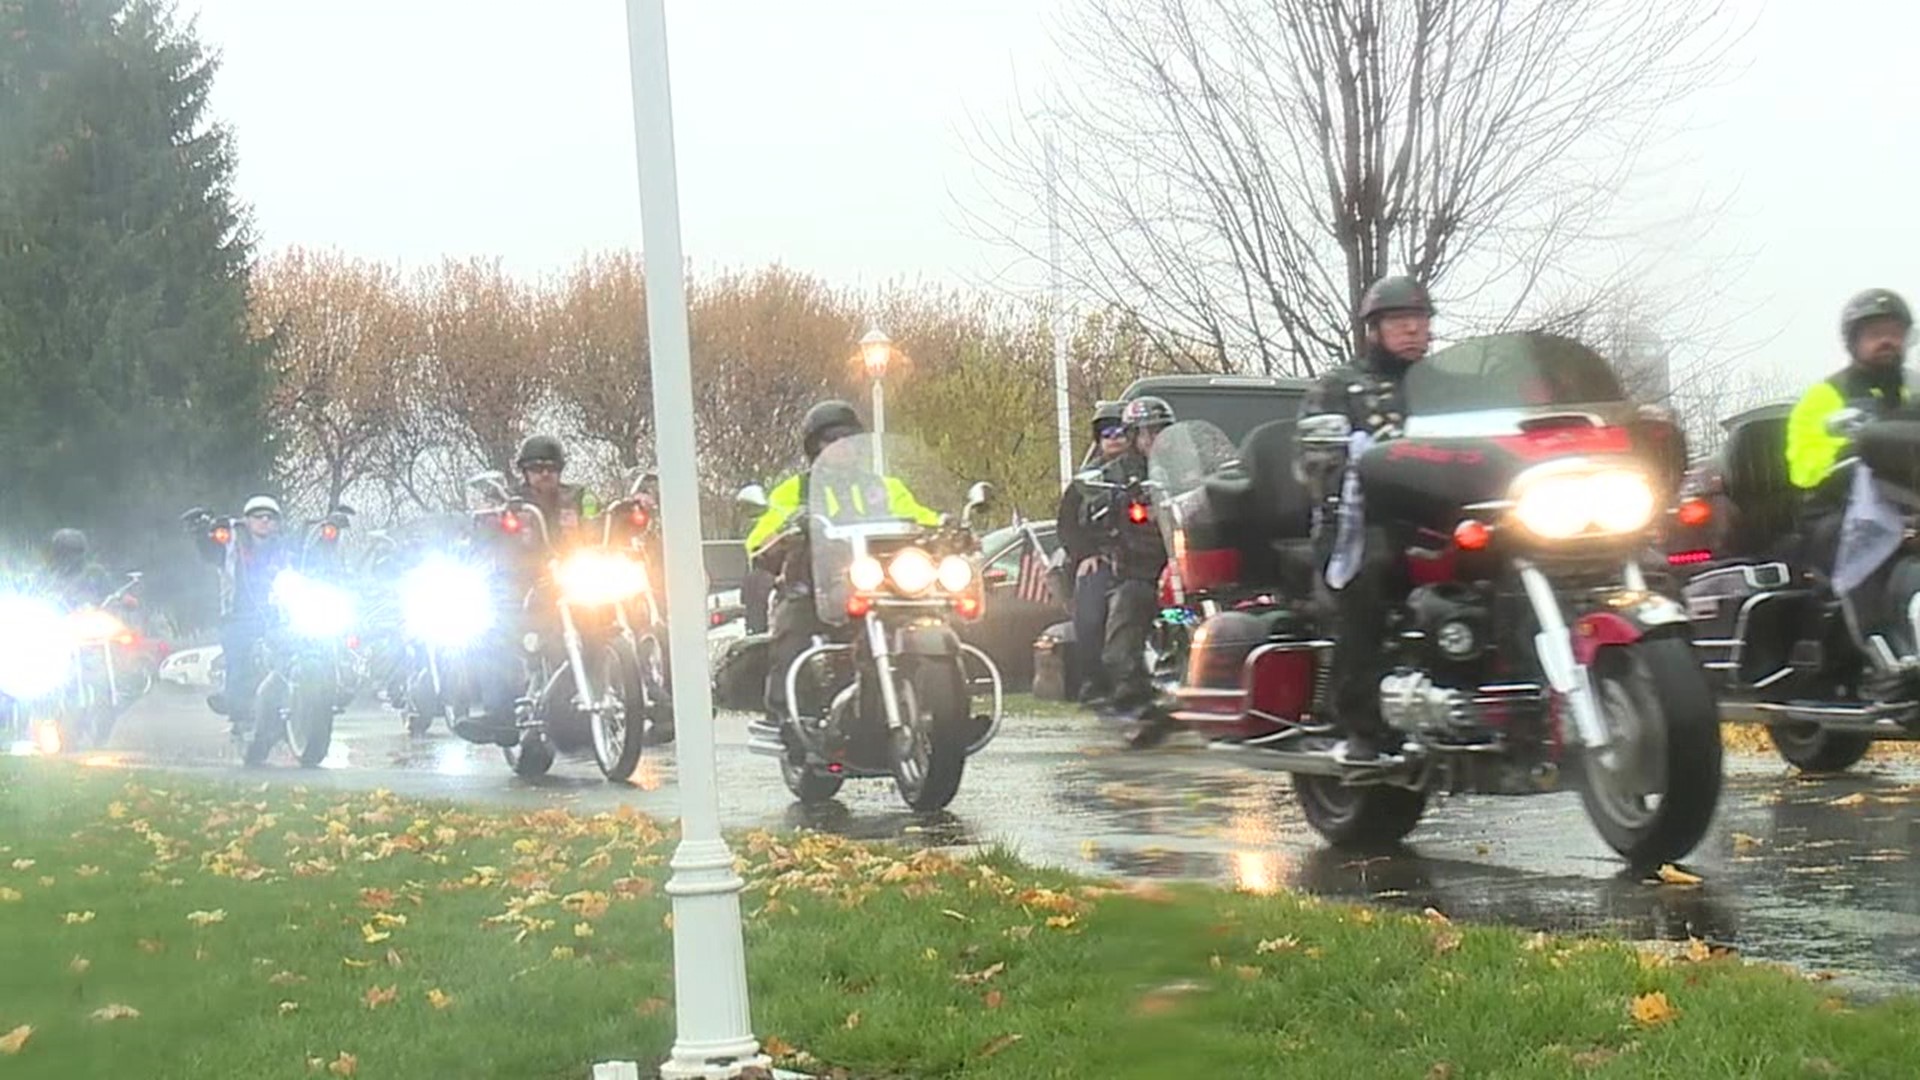 A group of bikers came together in Mifflinburg to honor their friend who was killed in a collision last week.